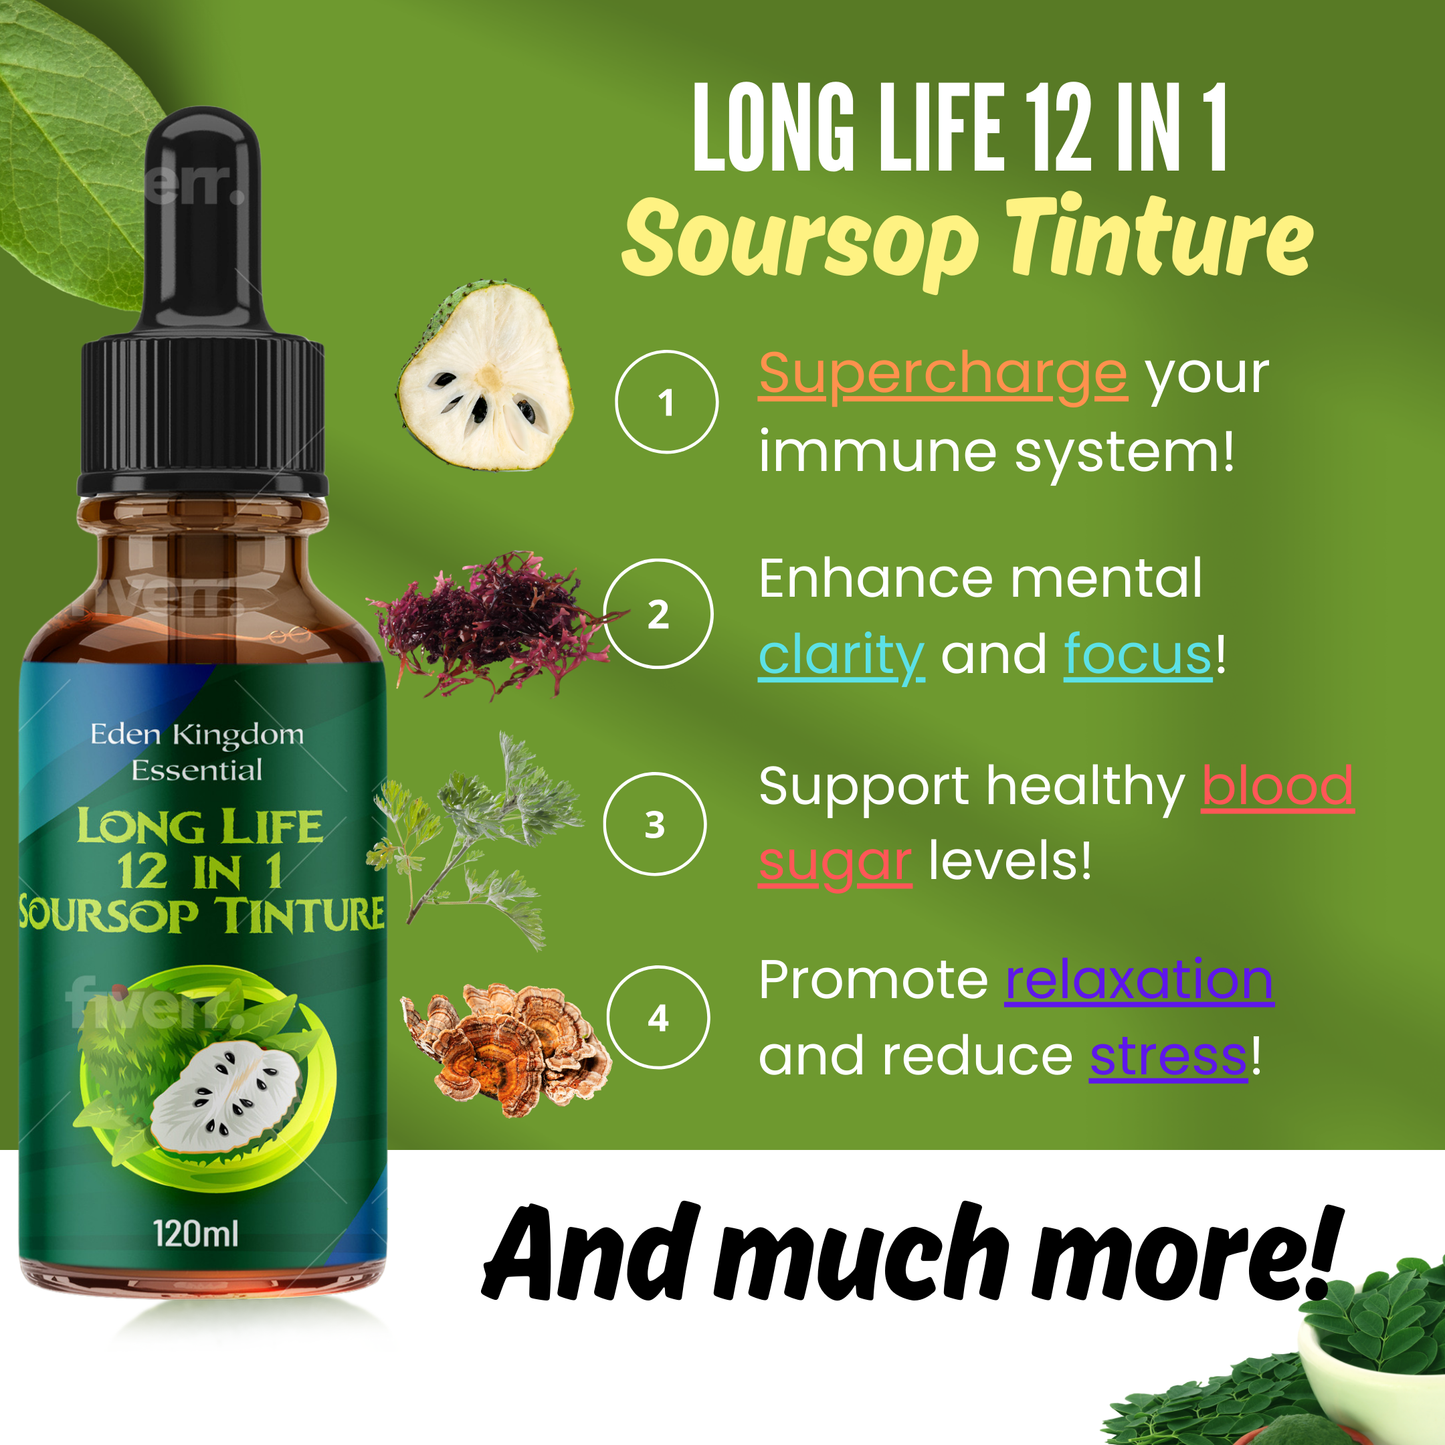 NEW Long Life 12 in 1 Soursop Tincture!